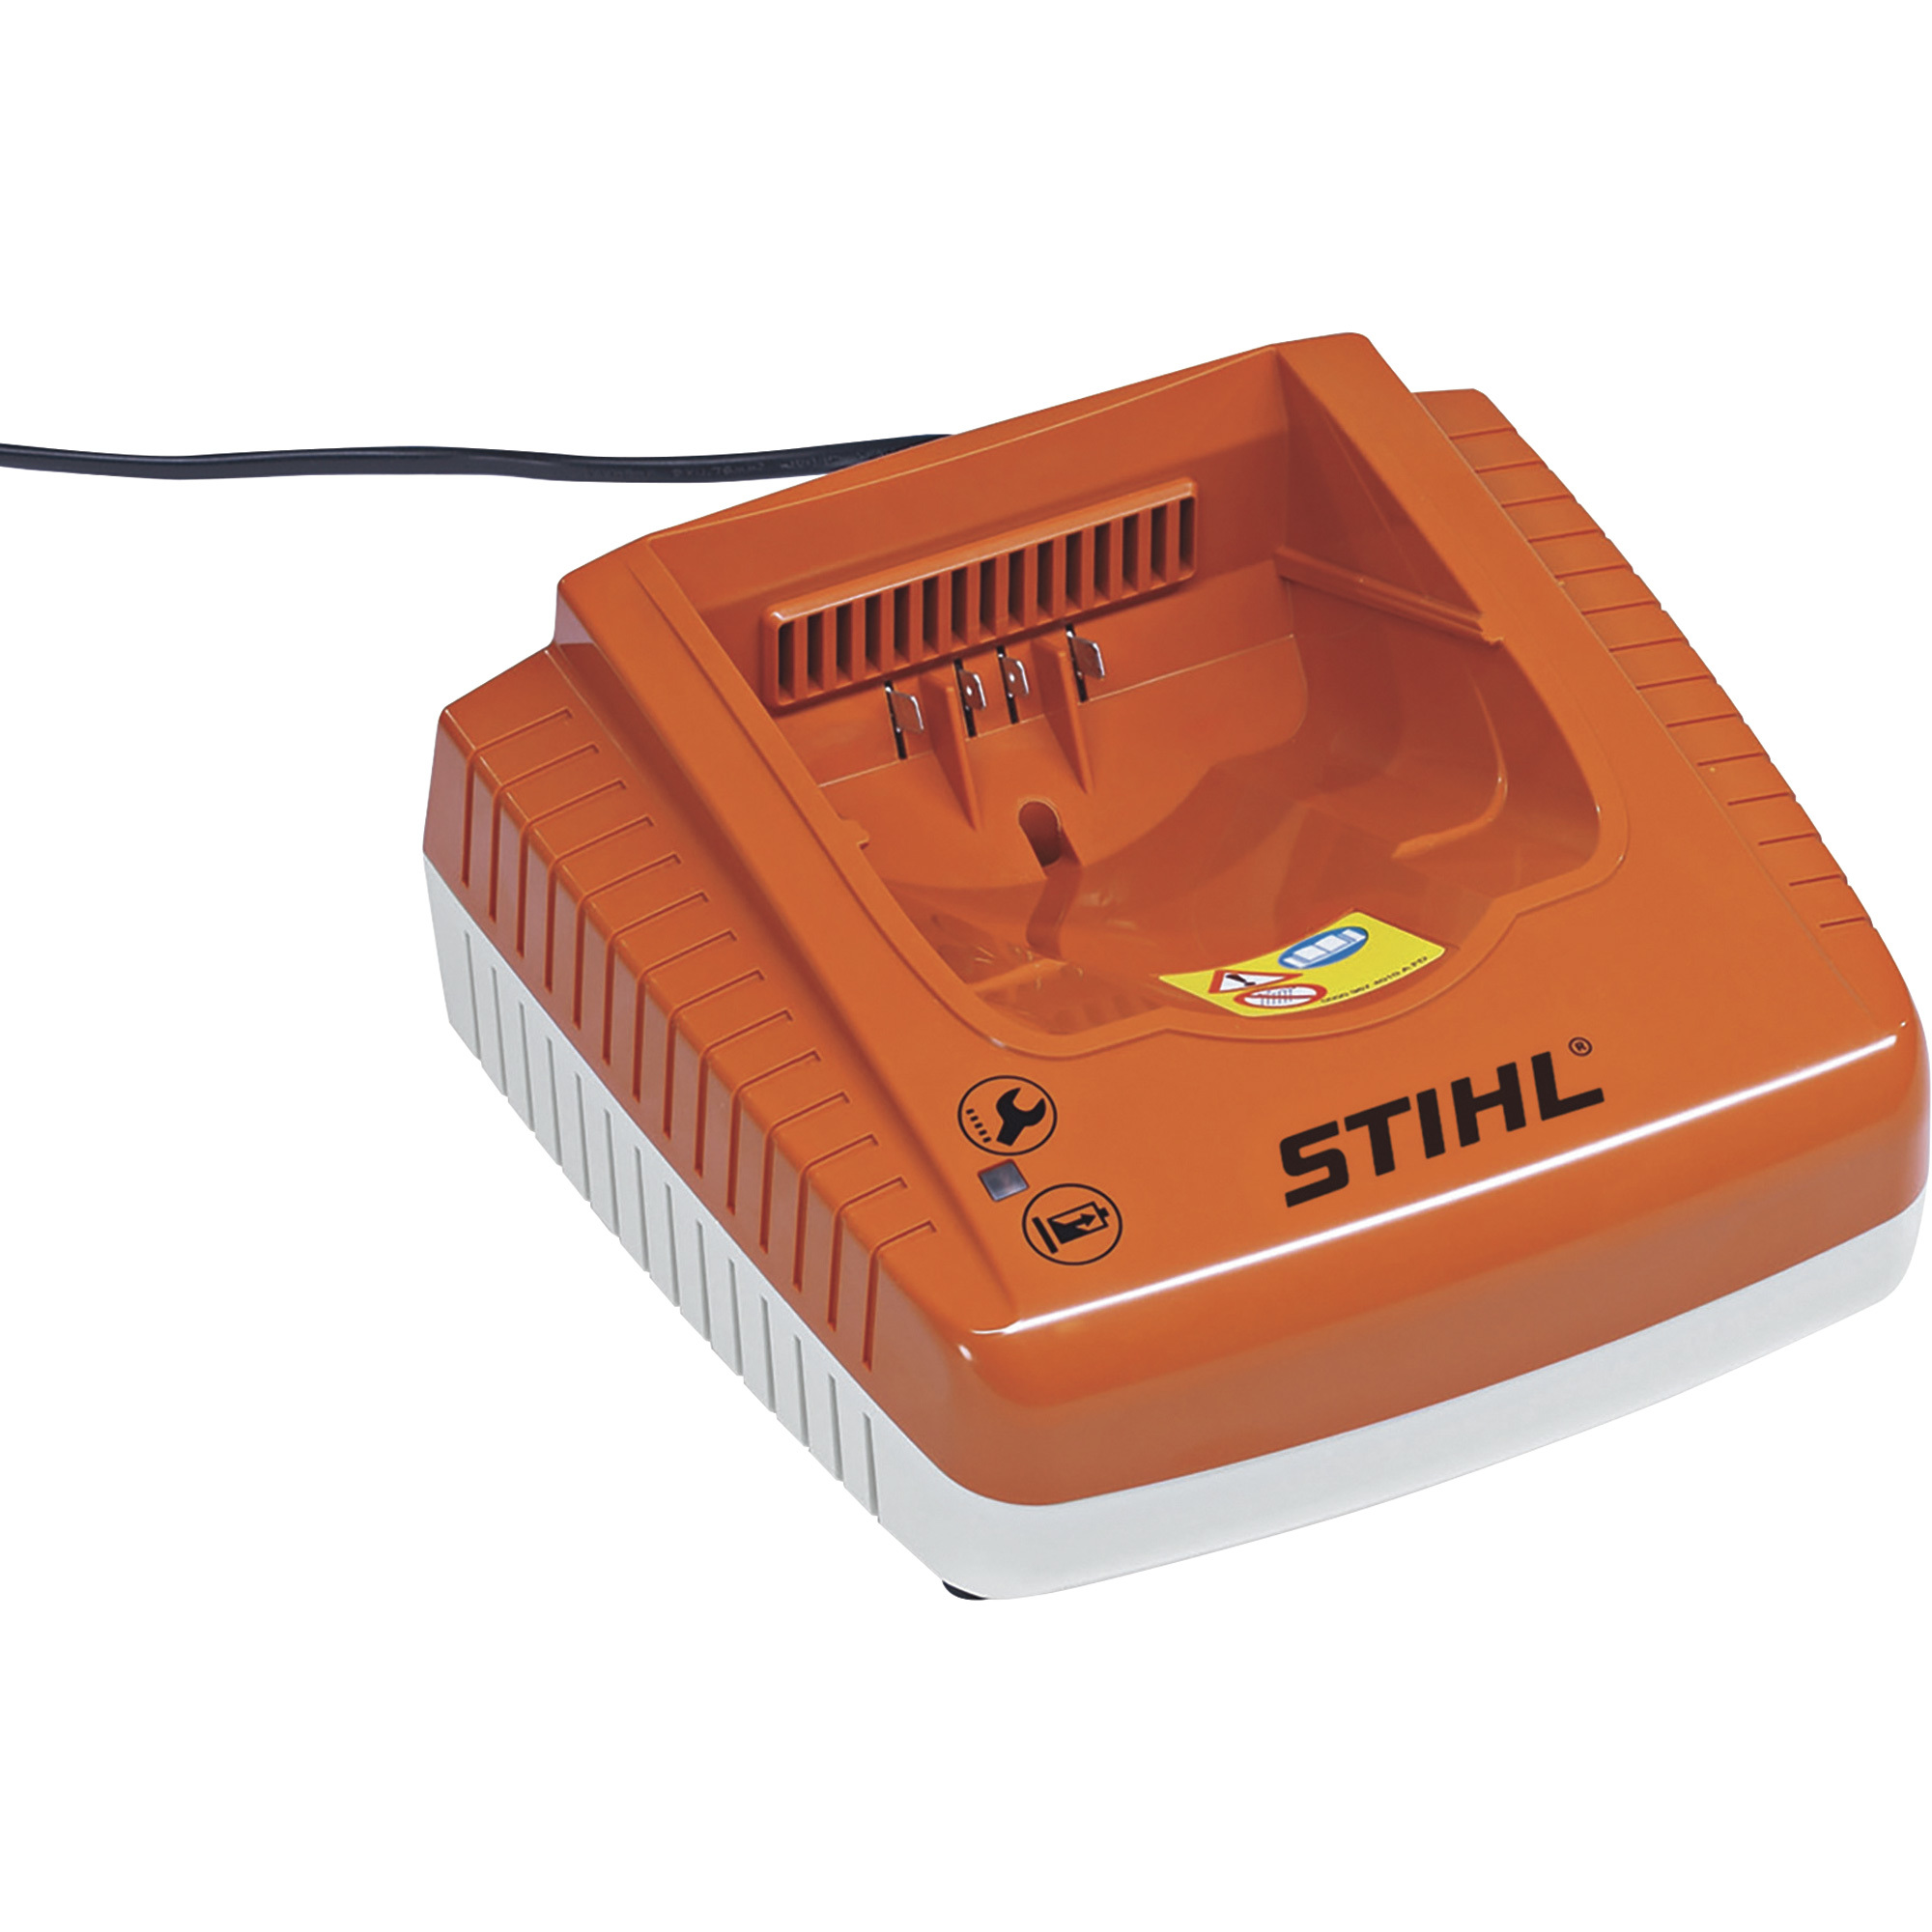 Stihl Rapid Lithium-Ion Battery Charger â Model AL 300